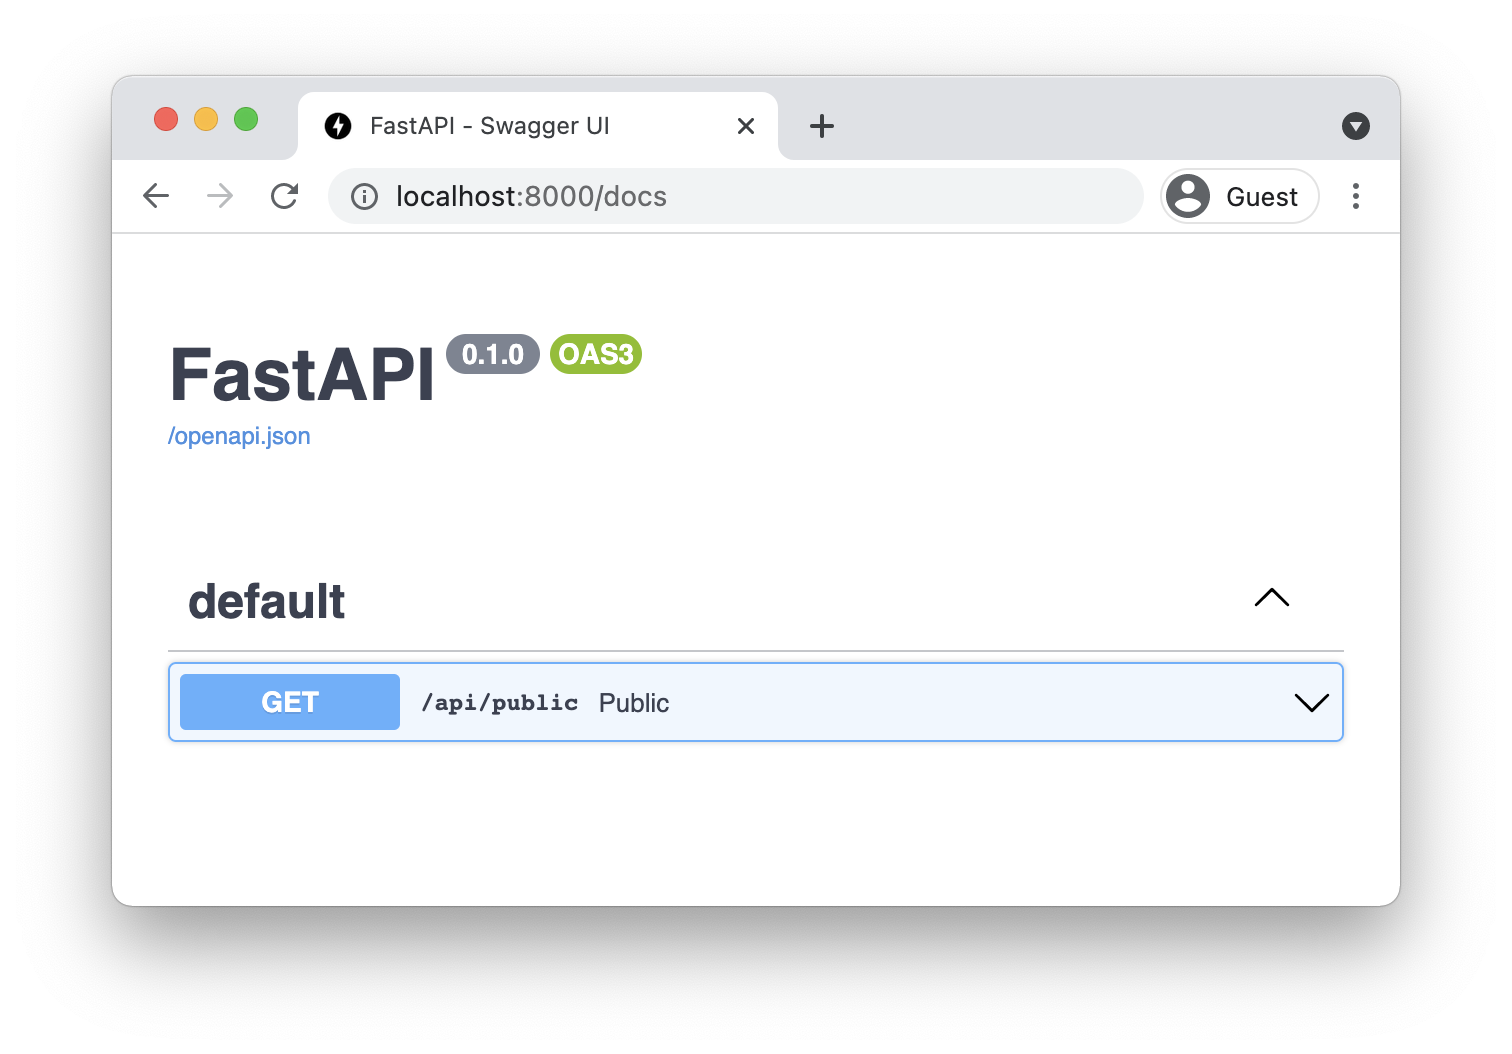 FastAPI documentation page showing the public endpoint